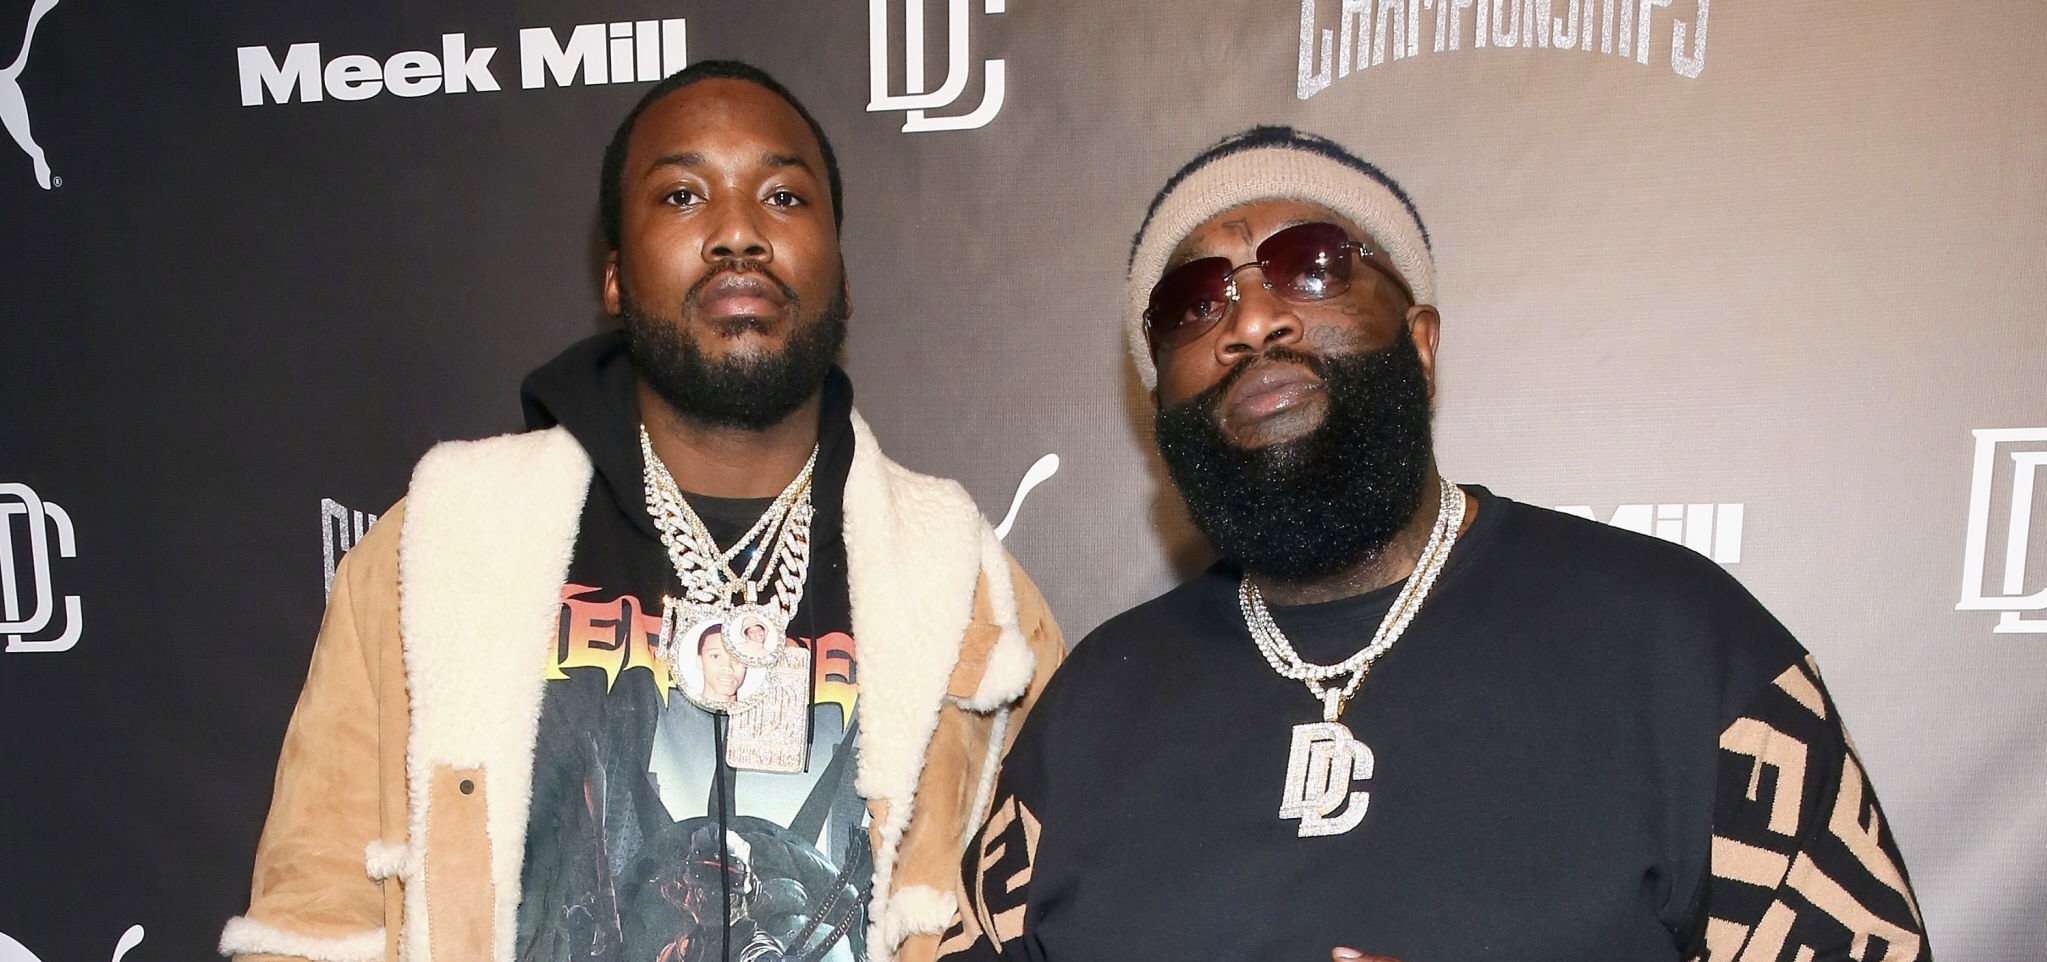 Rick ross and meek Mill